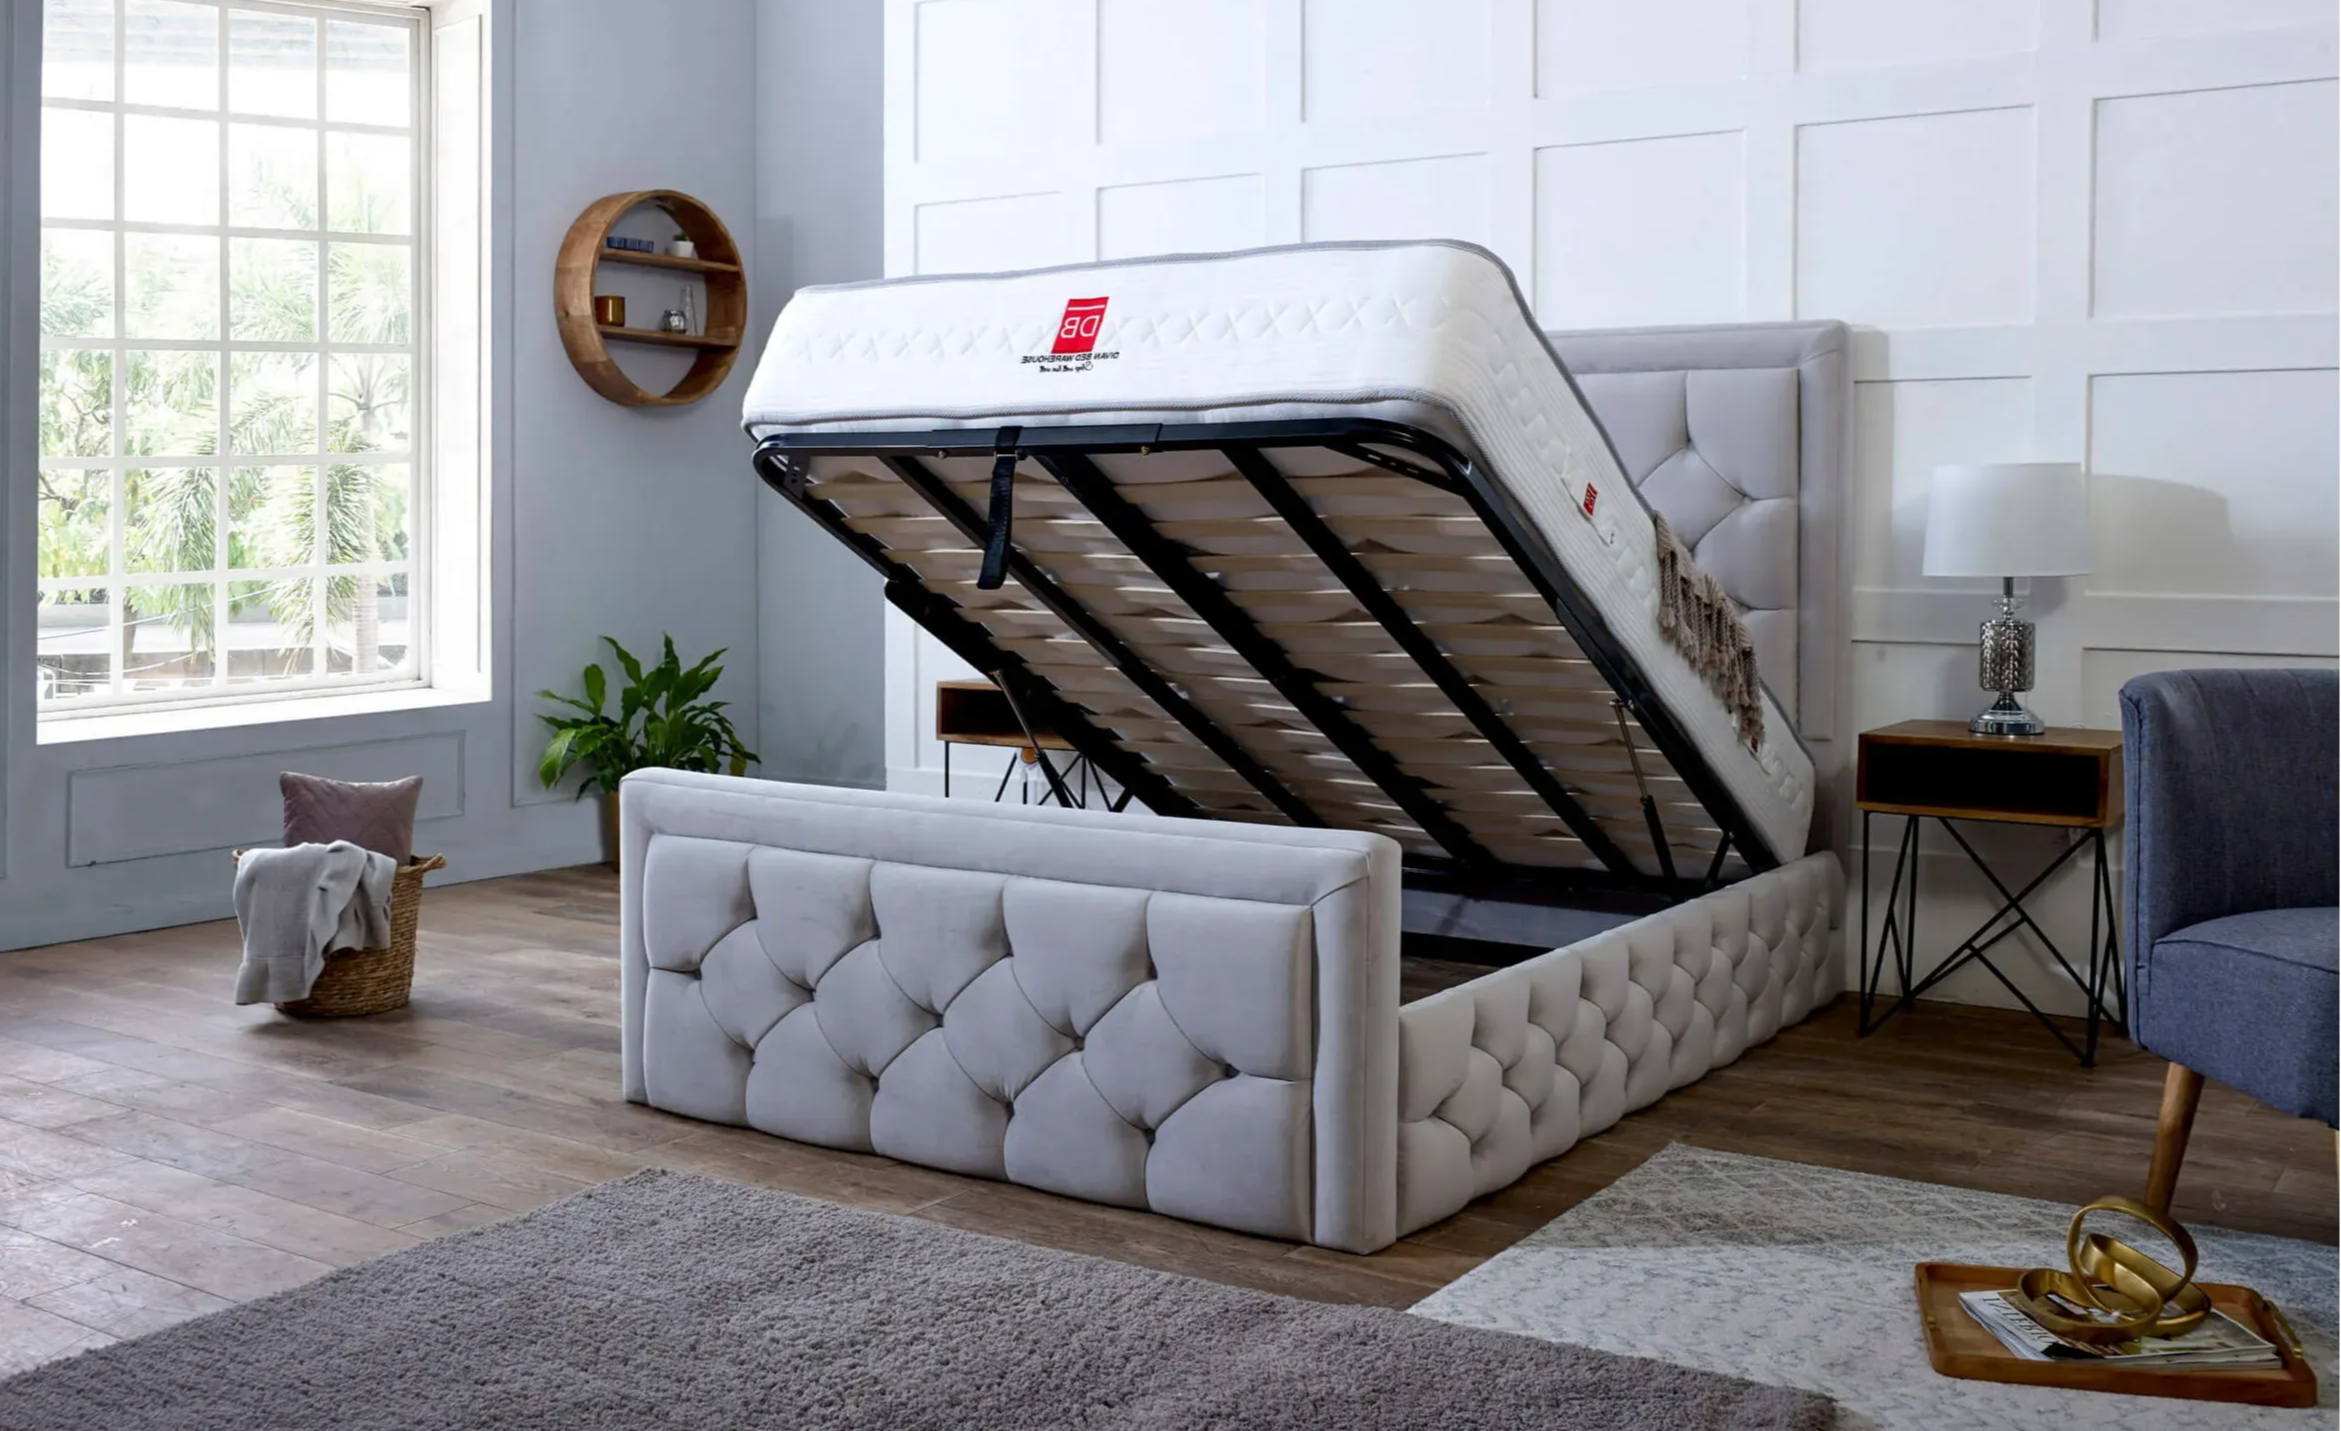 How To Build an Ottoman Bed